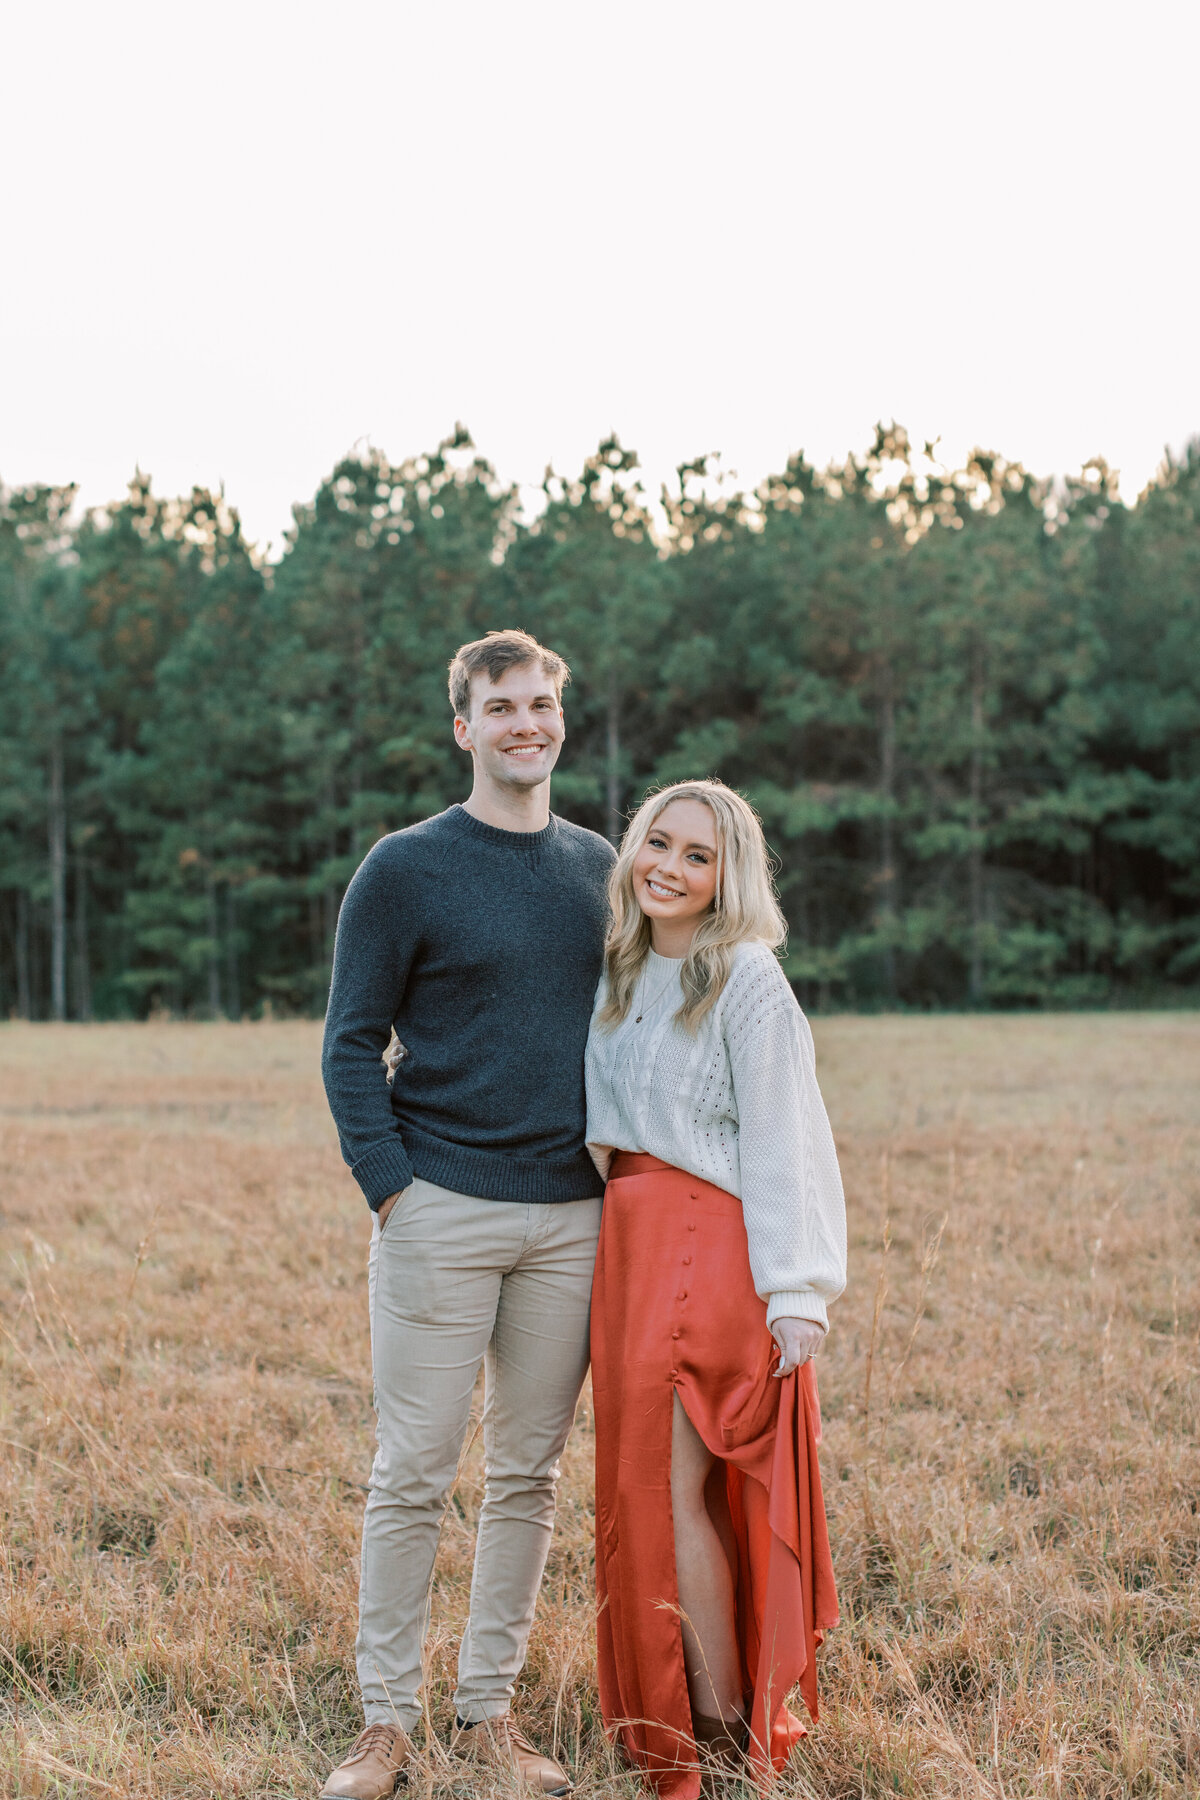 A couple stands in a field while smiling at the camera.